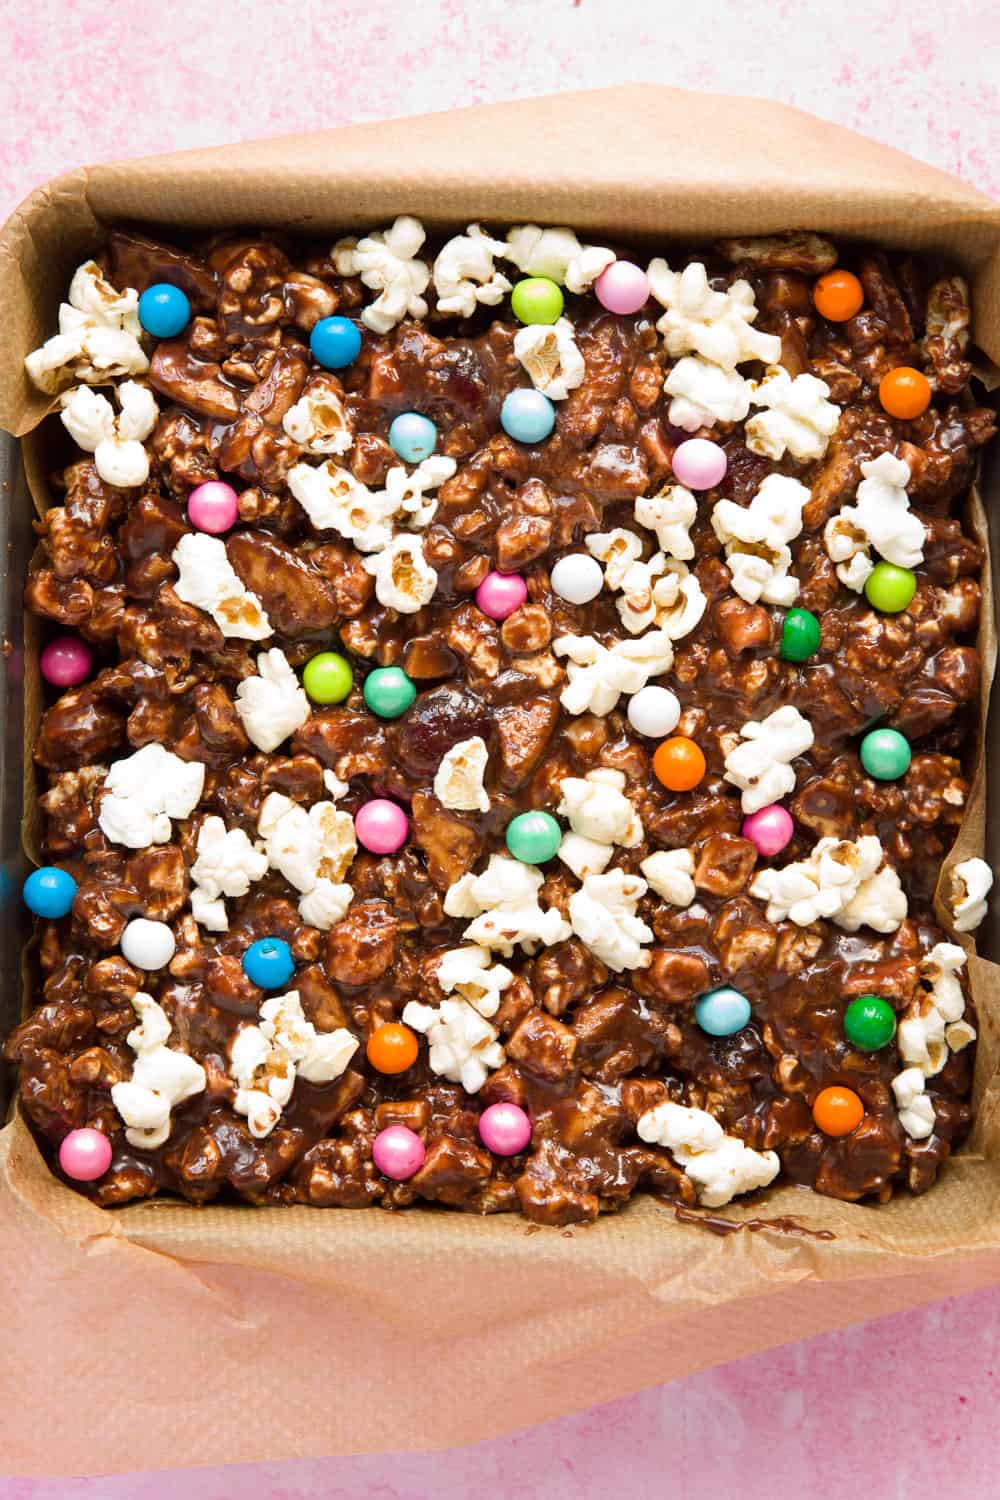 A slab of popcorn rocky road inside a square baking tin.